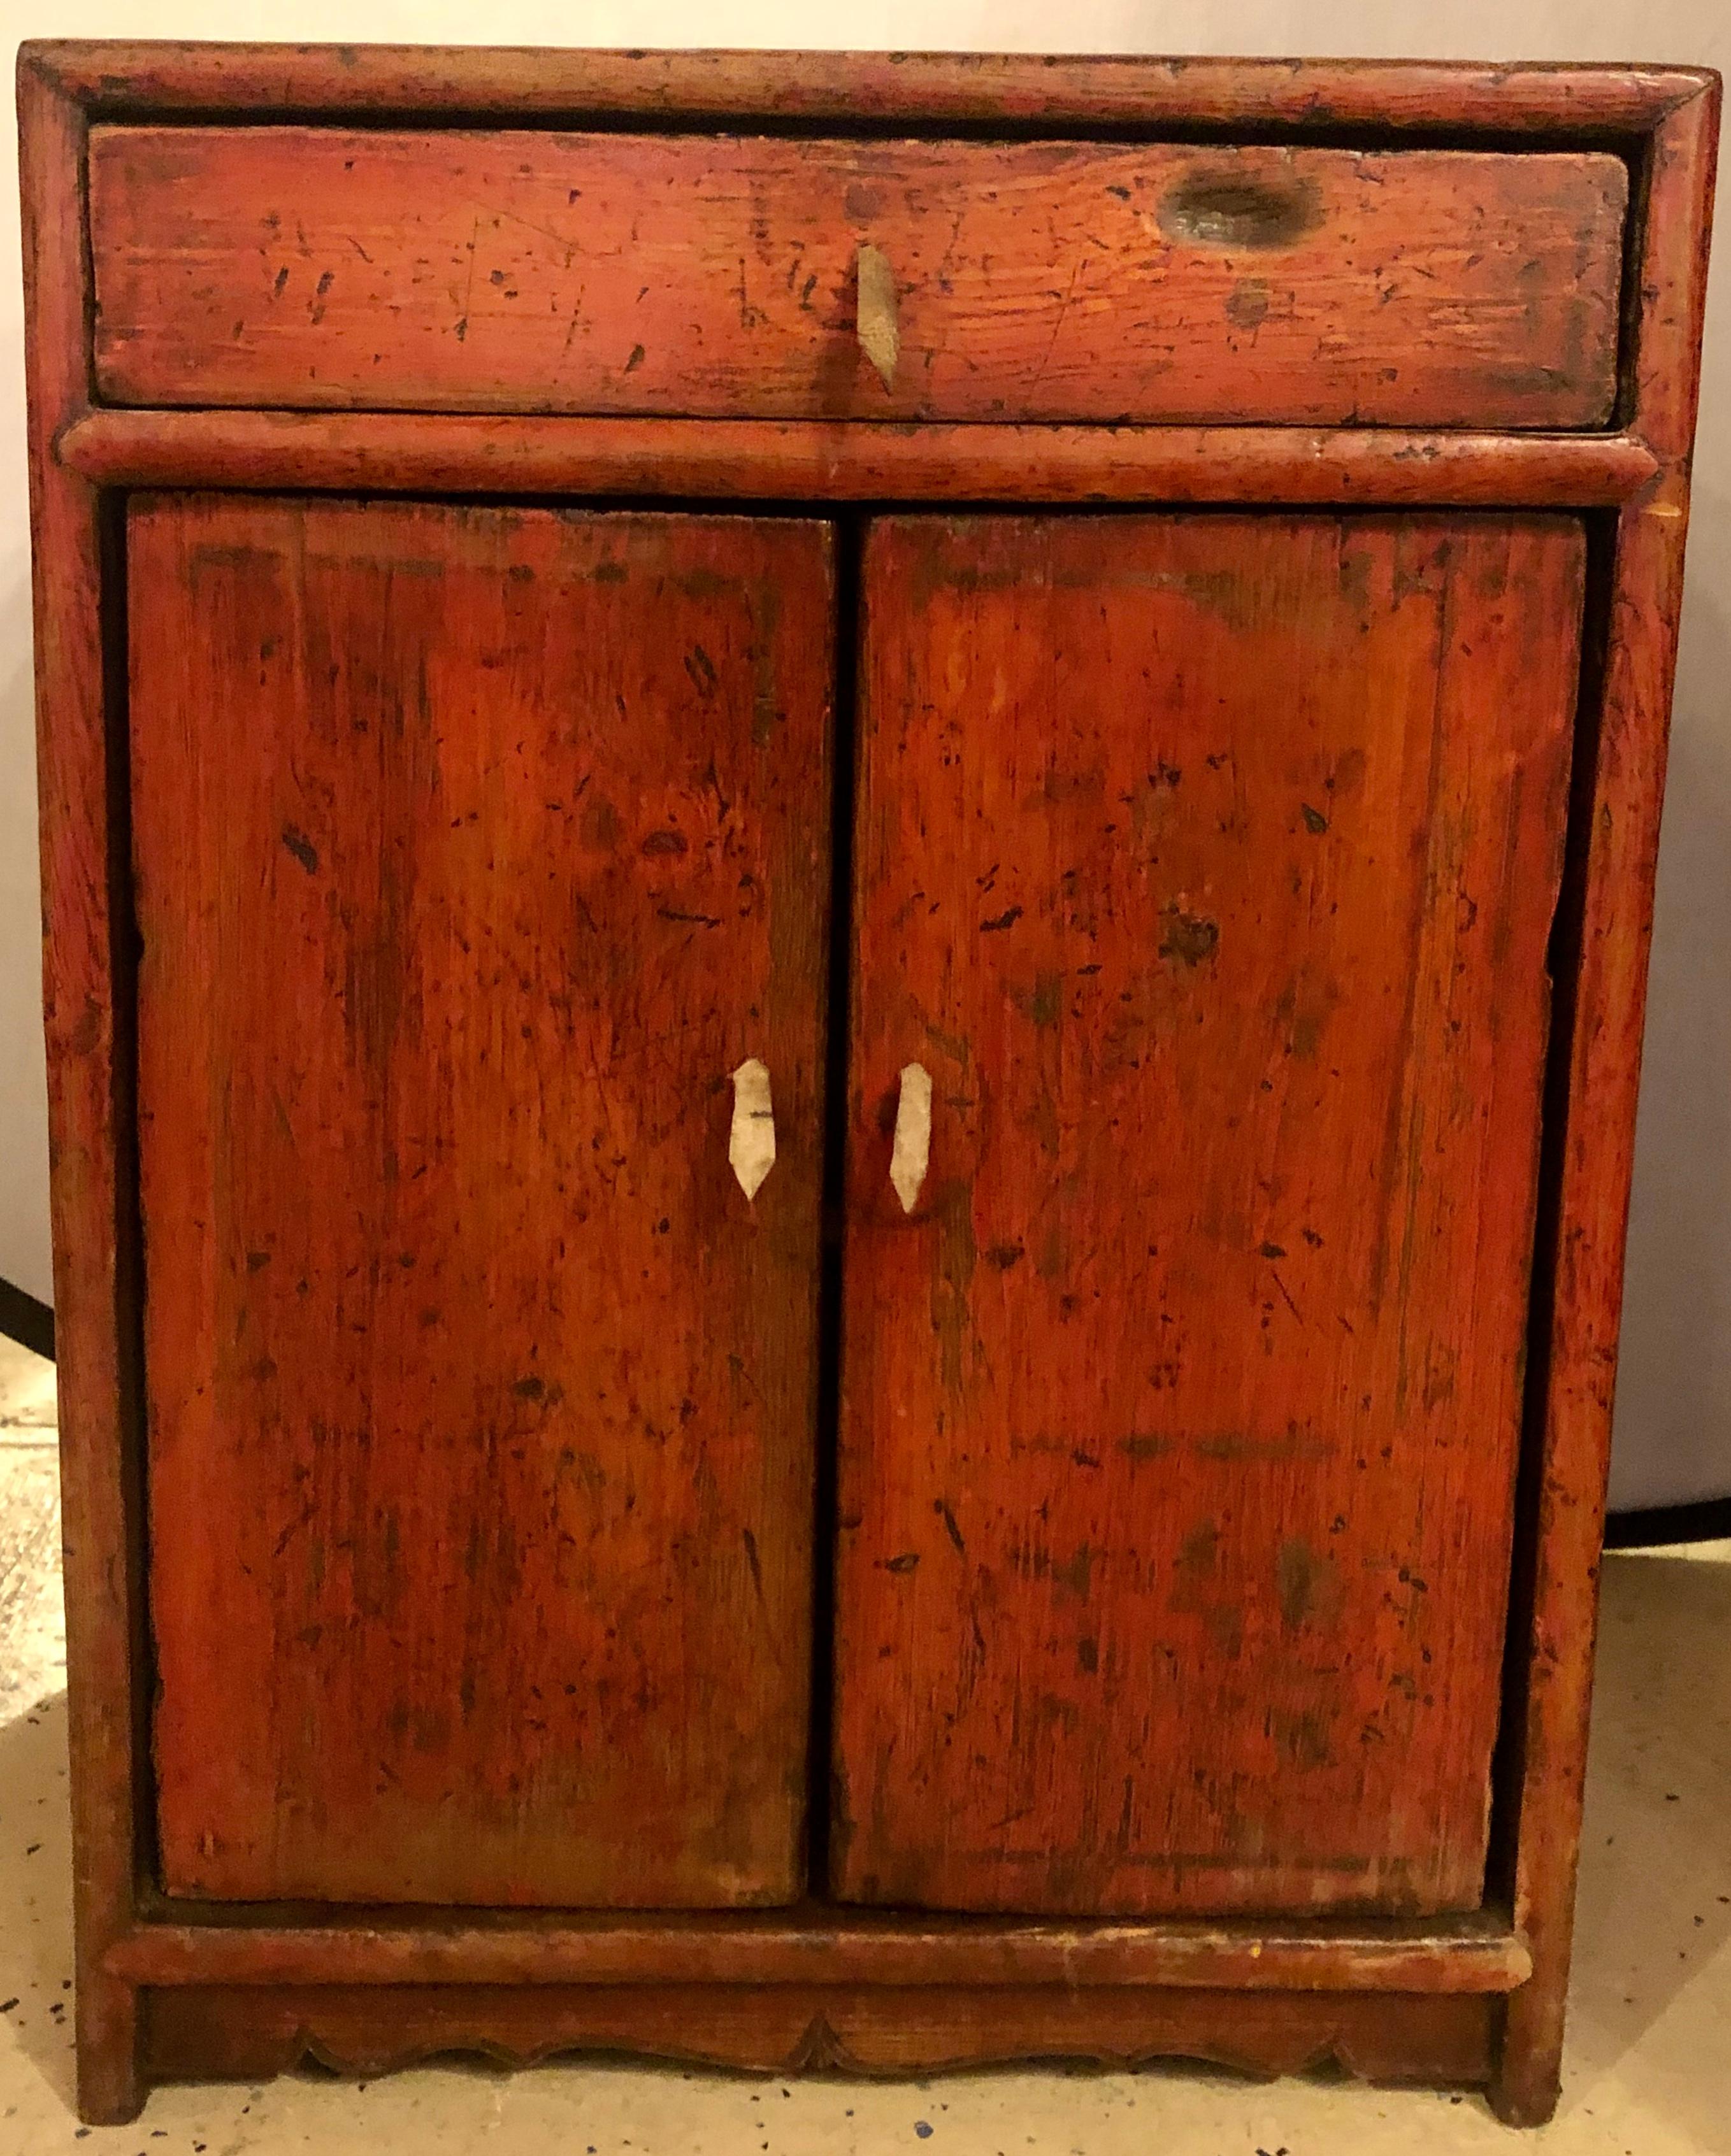 Wood Small Antique Rustic Cabinet / End or Side Table Having a Single Leather Pulls